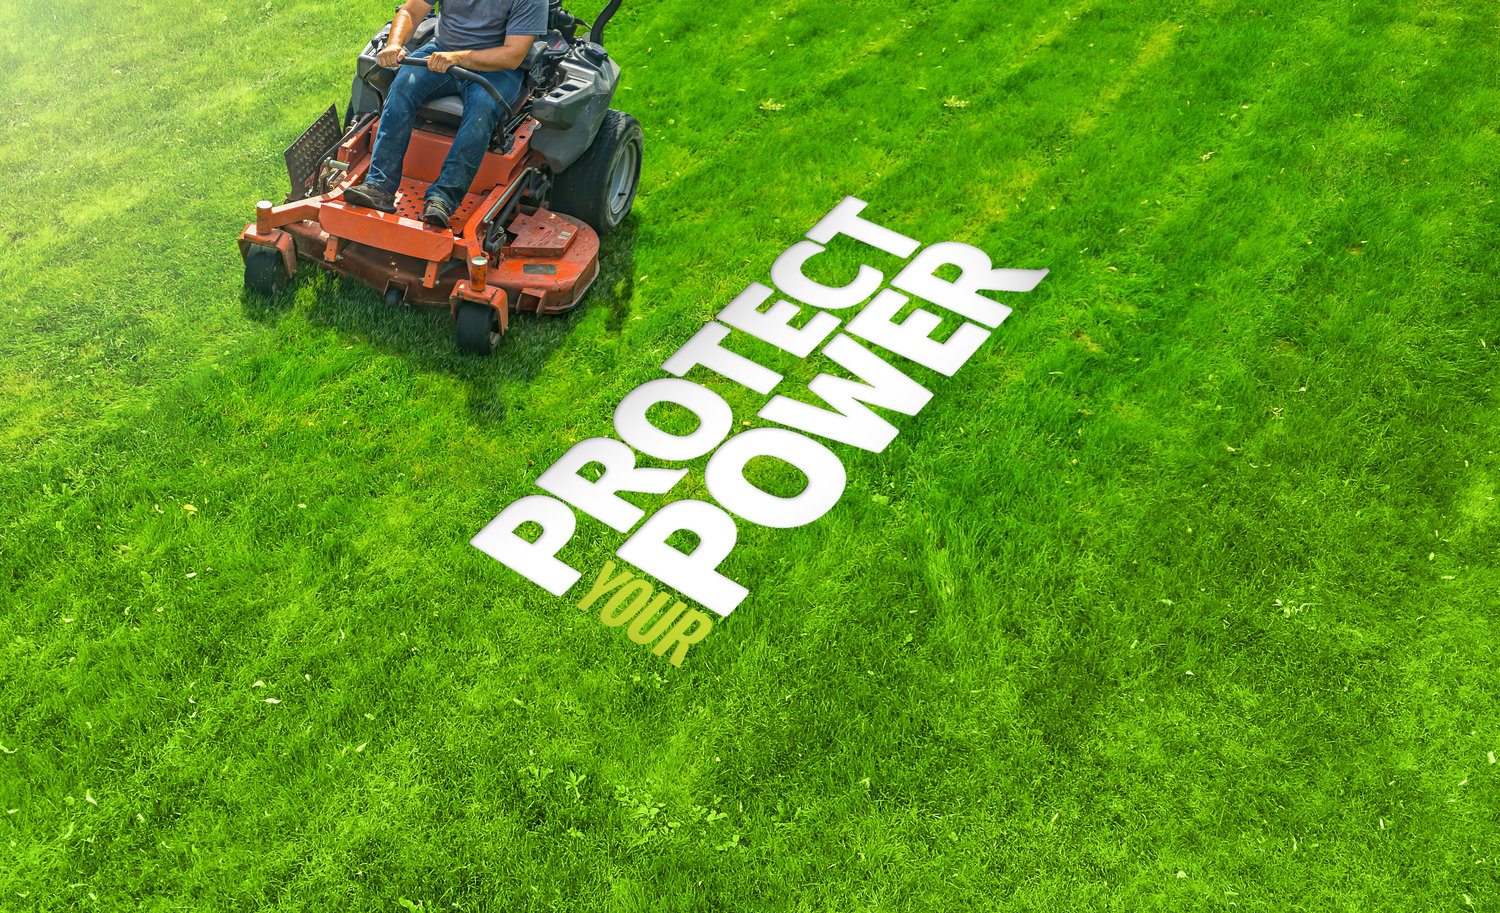 The grass can be greener on your side of the fence if you take proper care of your power equipment.